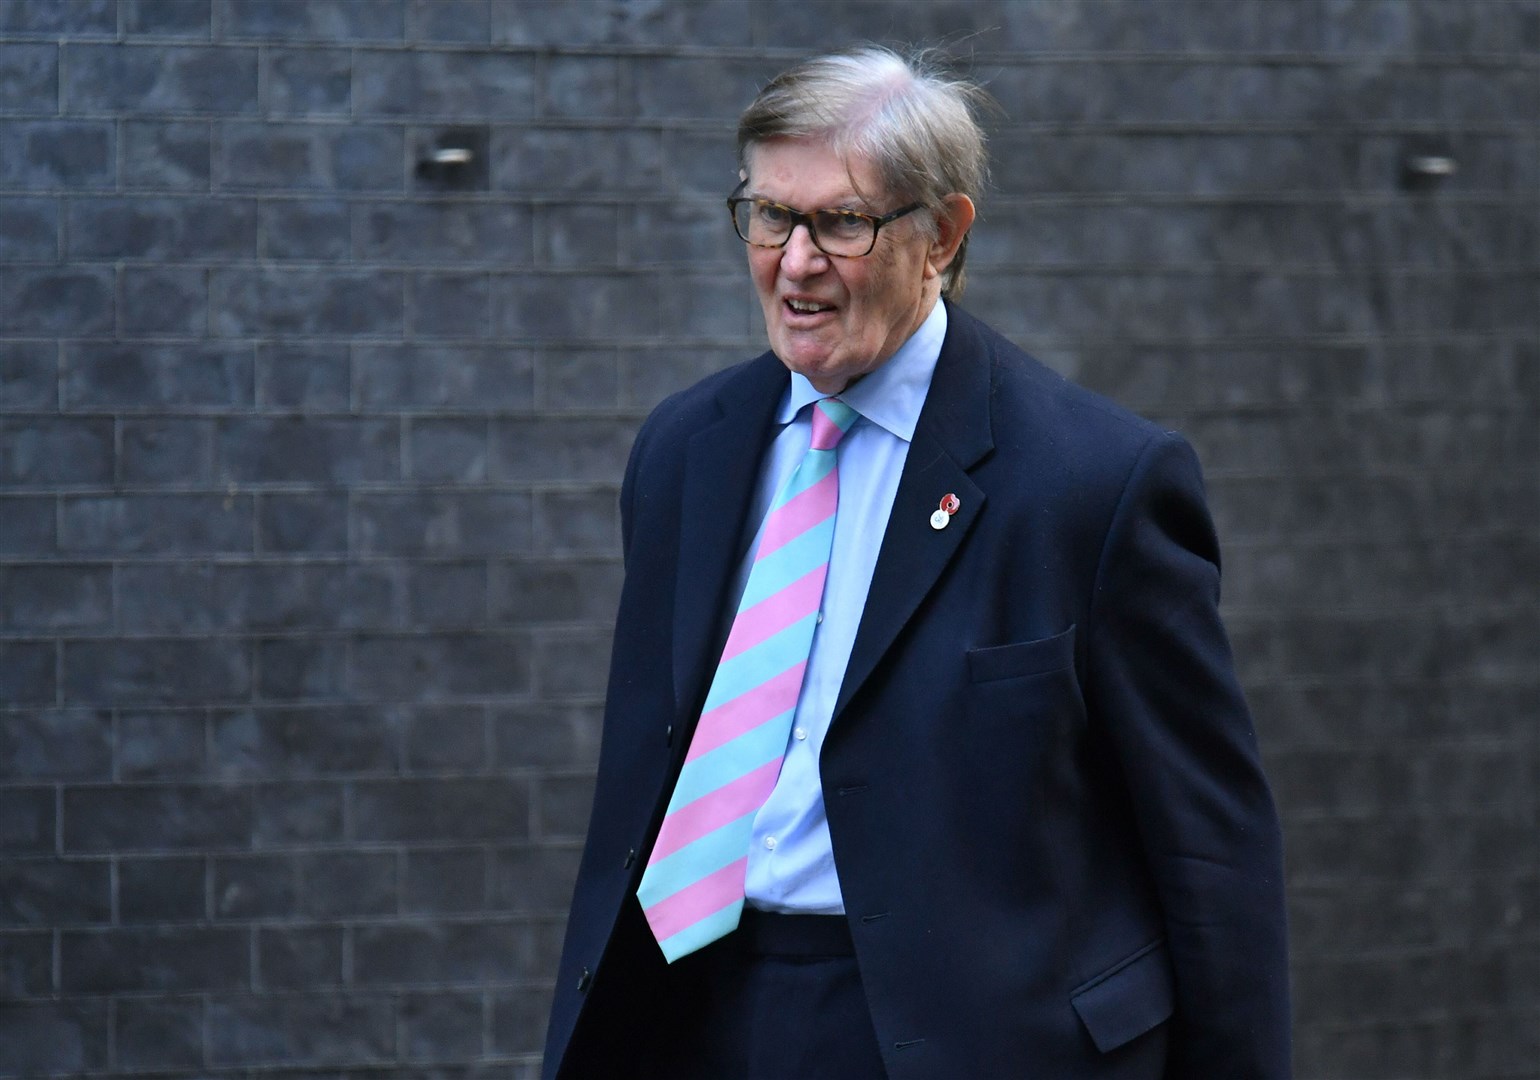 Sir Bill Cash has led the European Research Group’s ‘star chamber’ on the Windsor Framework (Dominic Lipinski/PA)